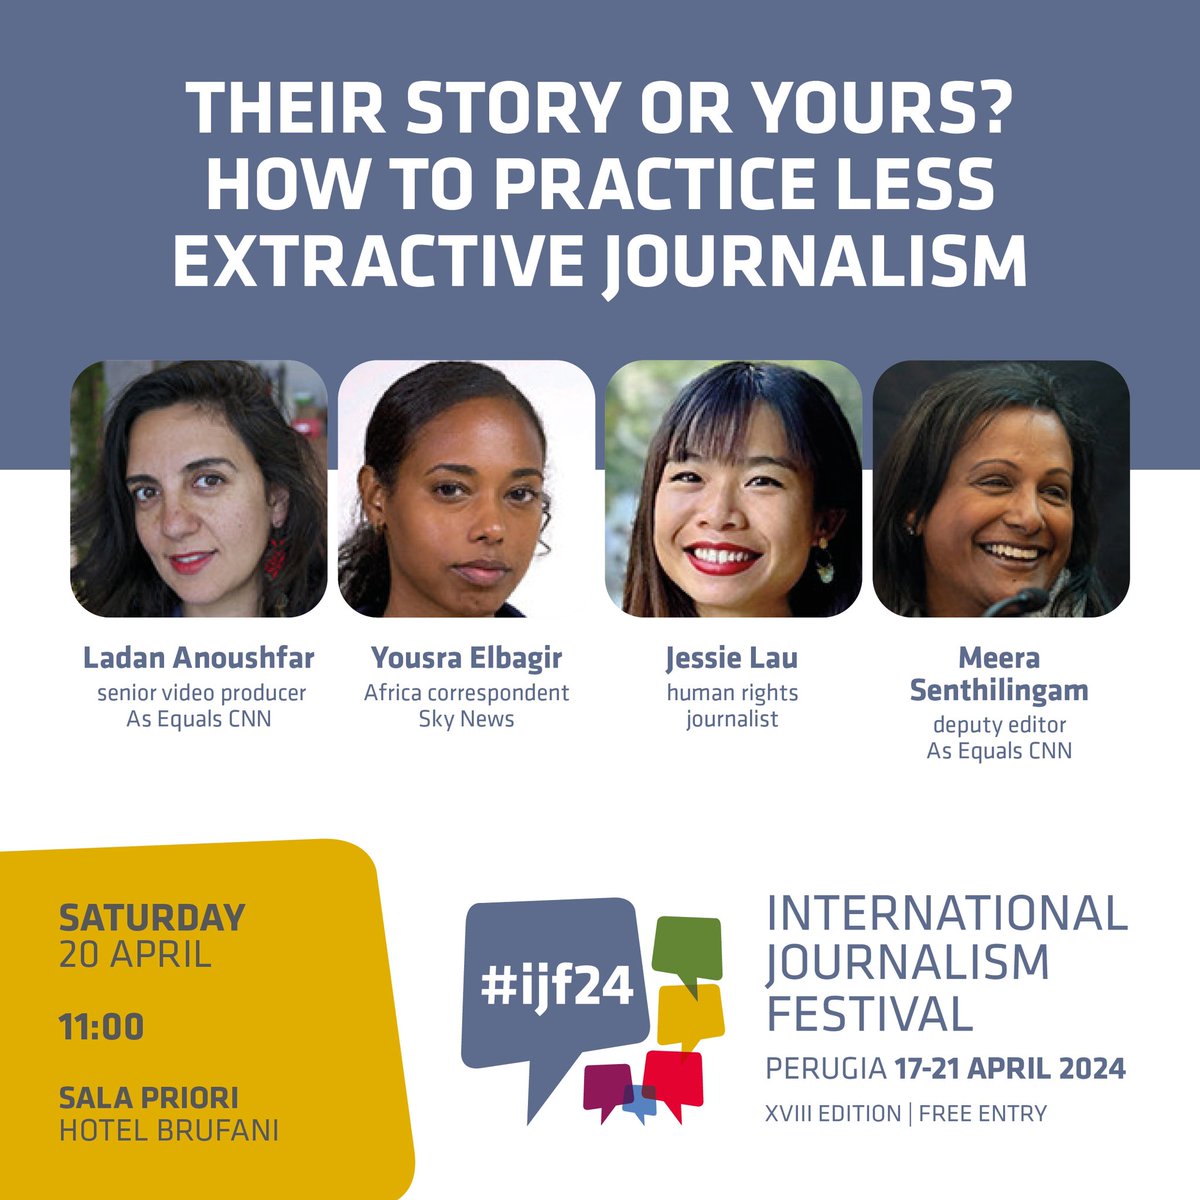 🔴SAVE THE DATE! 'Their story or yours? How to practice less extractive journalism' #ijf24 with  @Ladan_Anoushfar @YousraElbagir @_laujessie @Meera_Senthi 🎥Live & On Demand > Sat, 20 Apr journalismfestival.com/programme/2024…